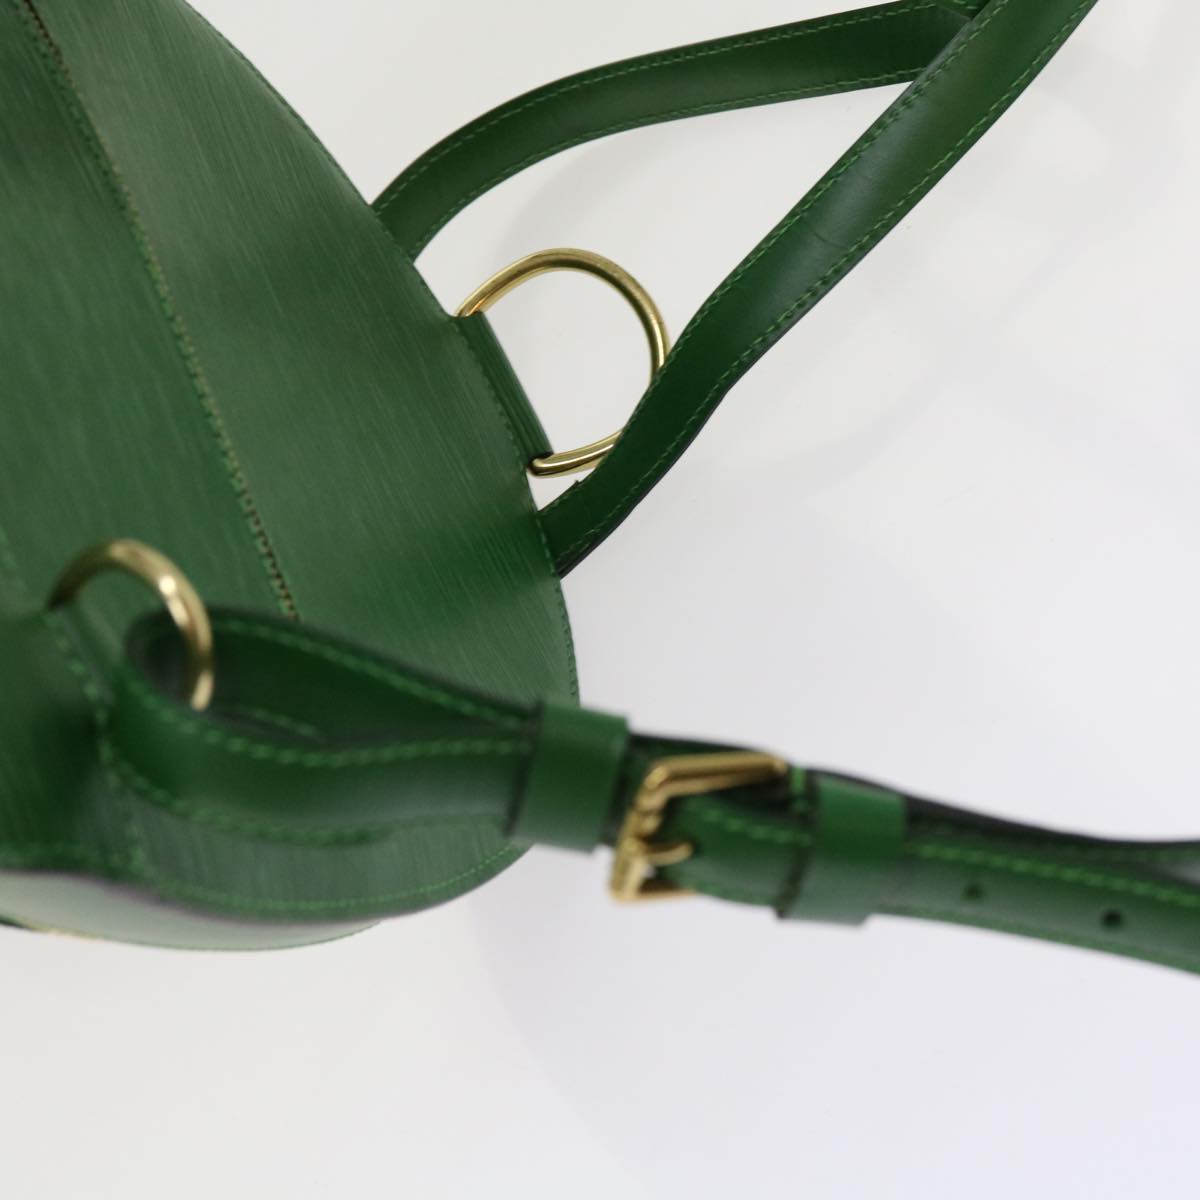 LOUIS VUITTON Epi Mabillon Backpack Green M52234 LV Auth ep2673